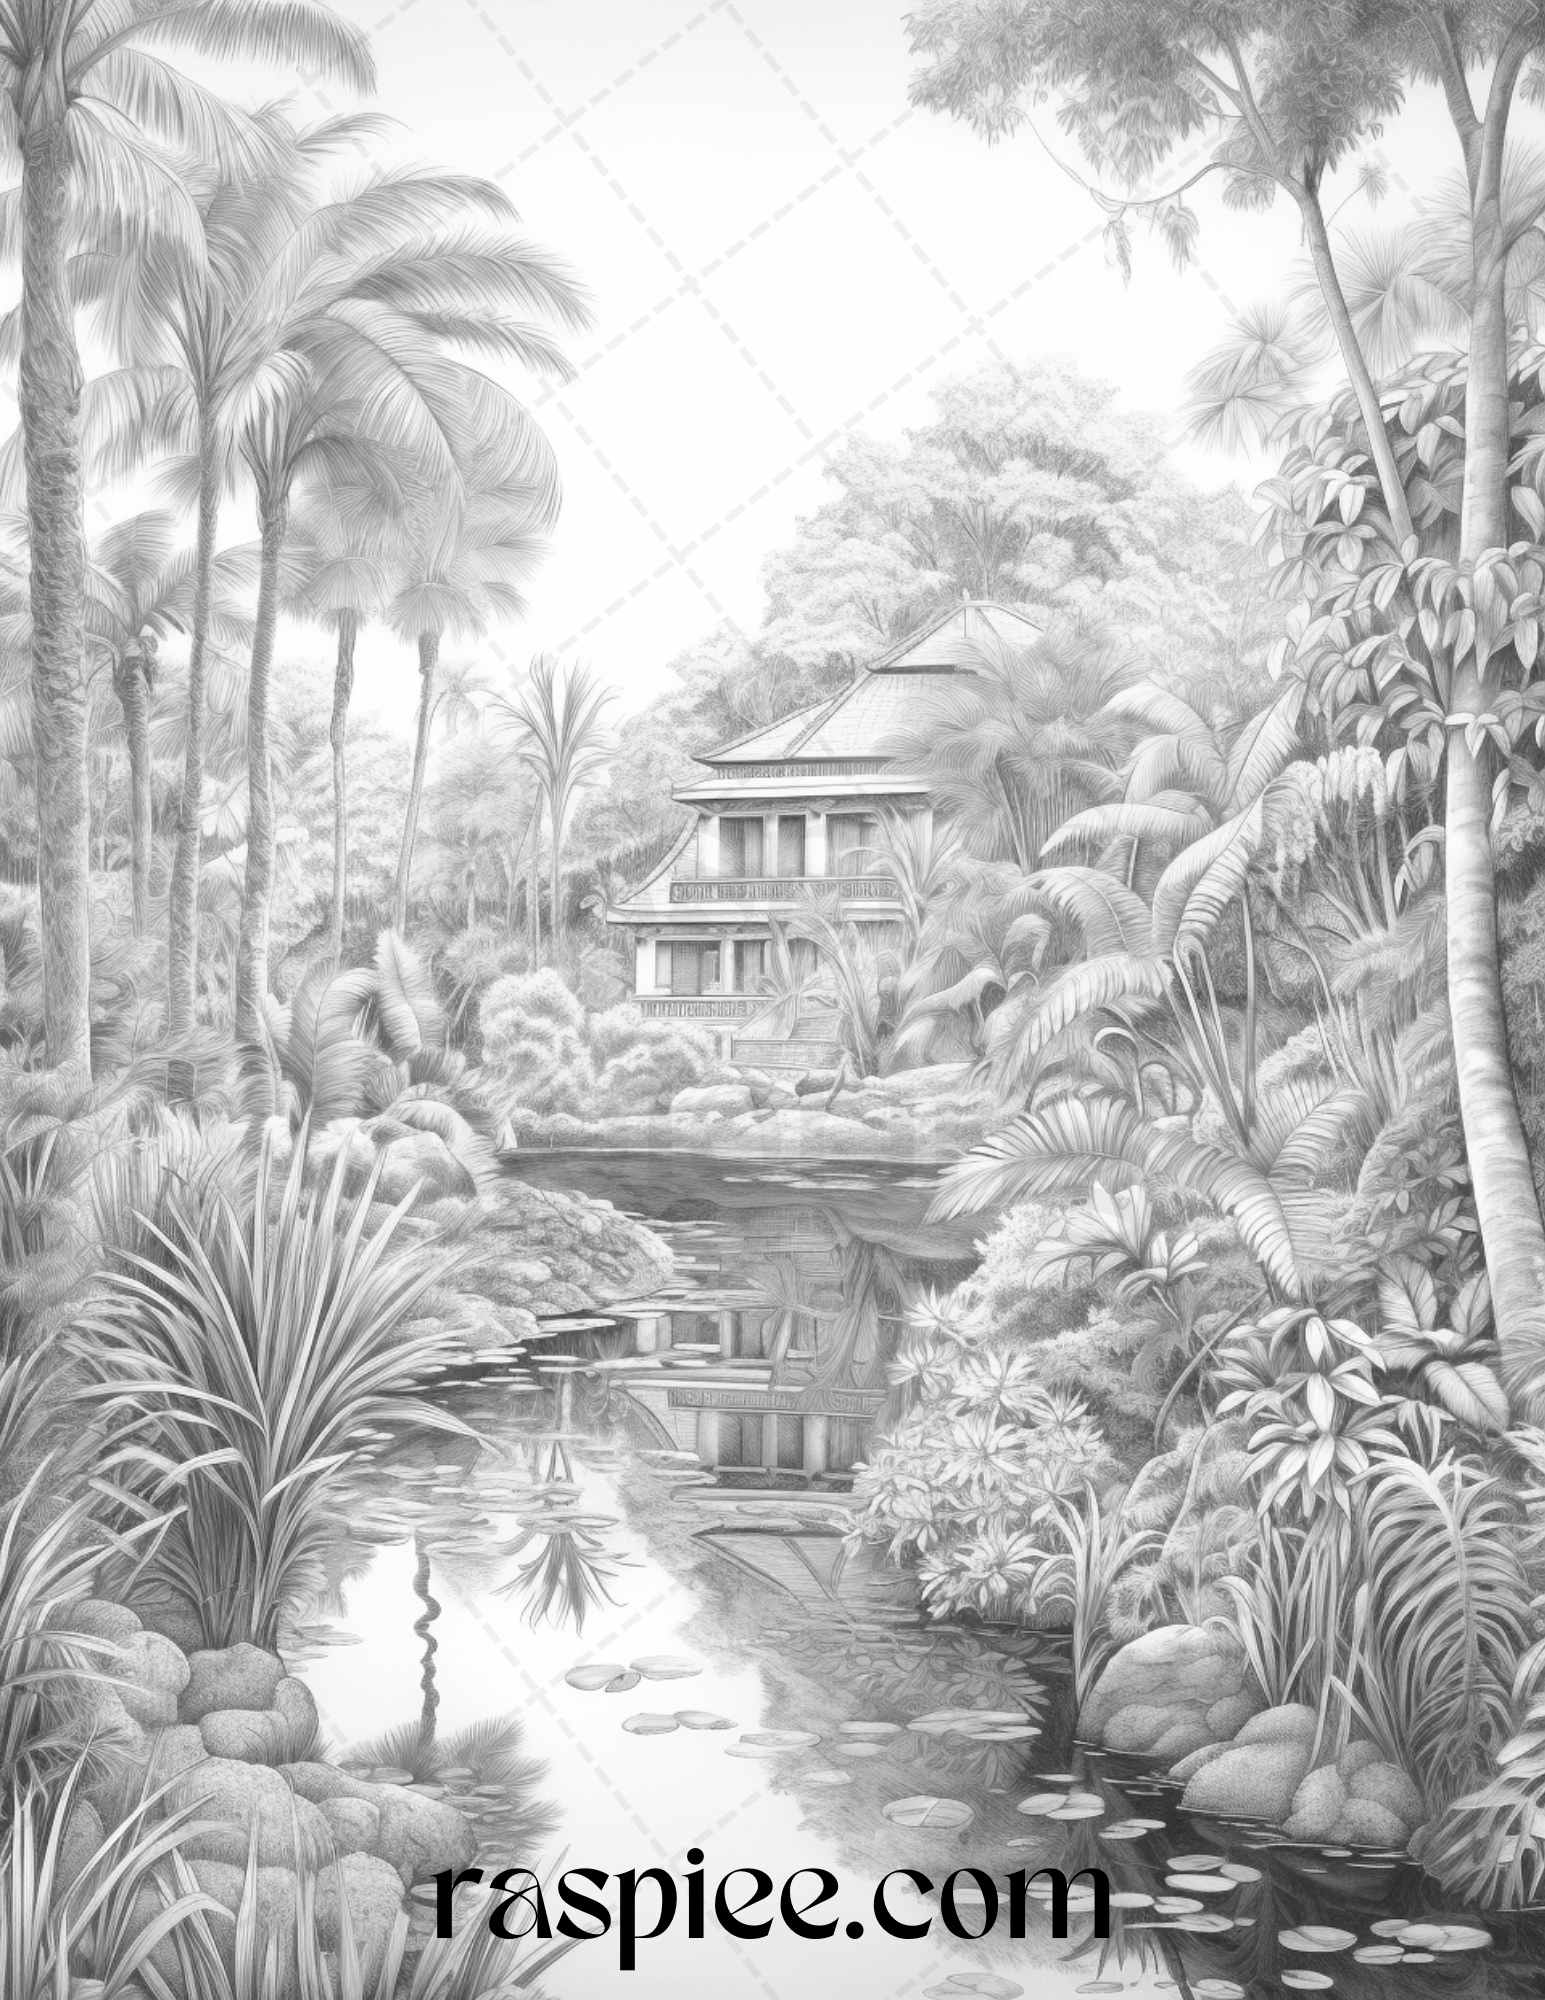 Tropical Oasis Grayscale Coloring Pages, Nature-Themed Adult Coloring, Grayscale Coloring Artwork, Adult Coloring Printable - Nature Scenes, Landscape Coloring Pages for Adults